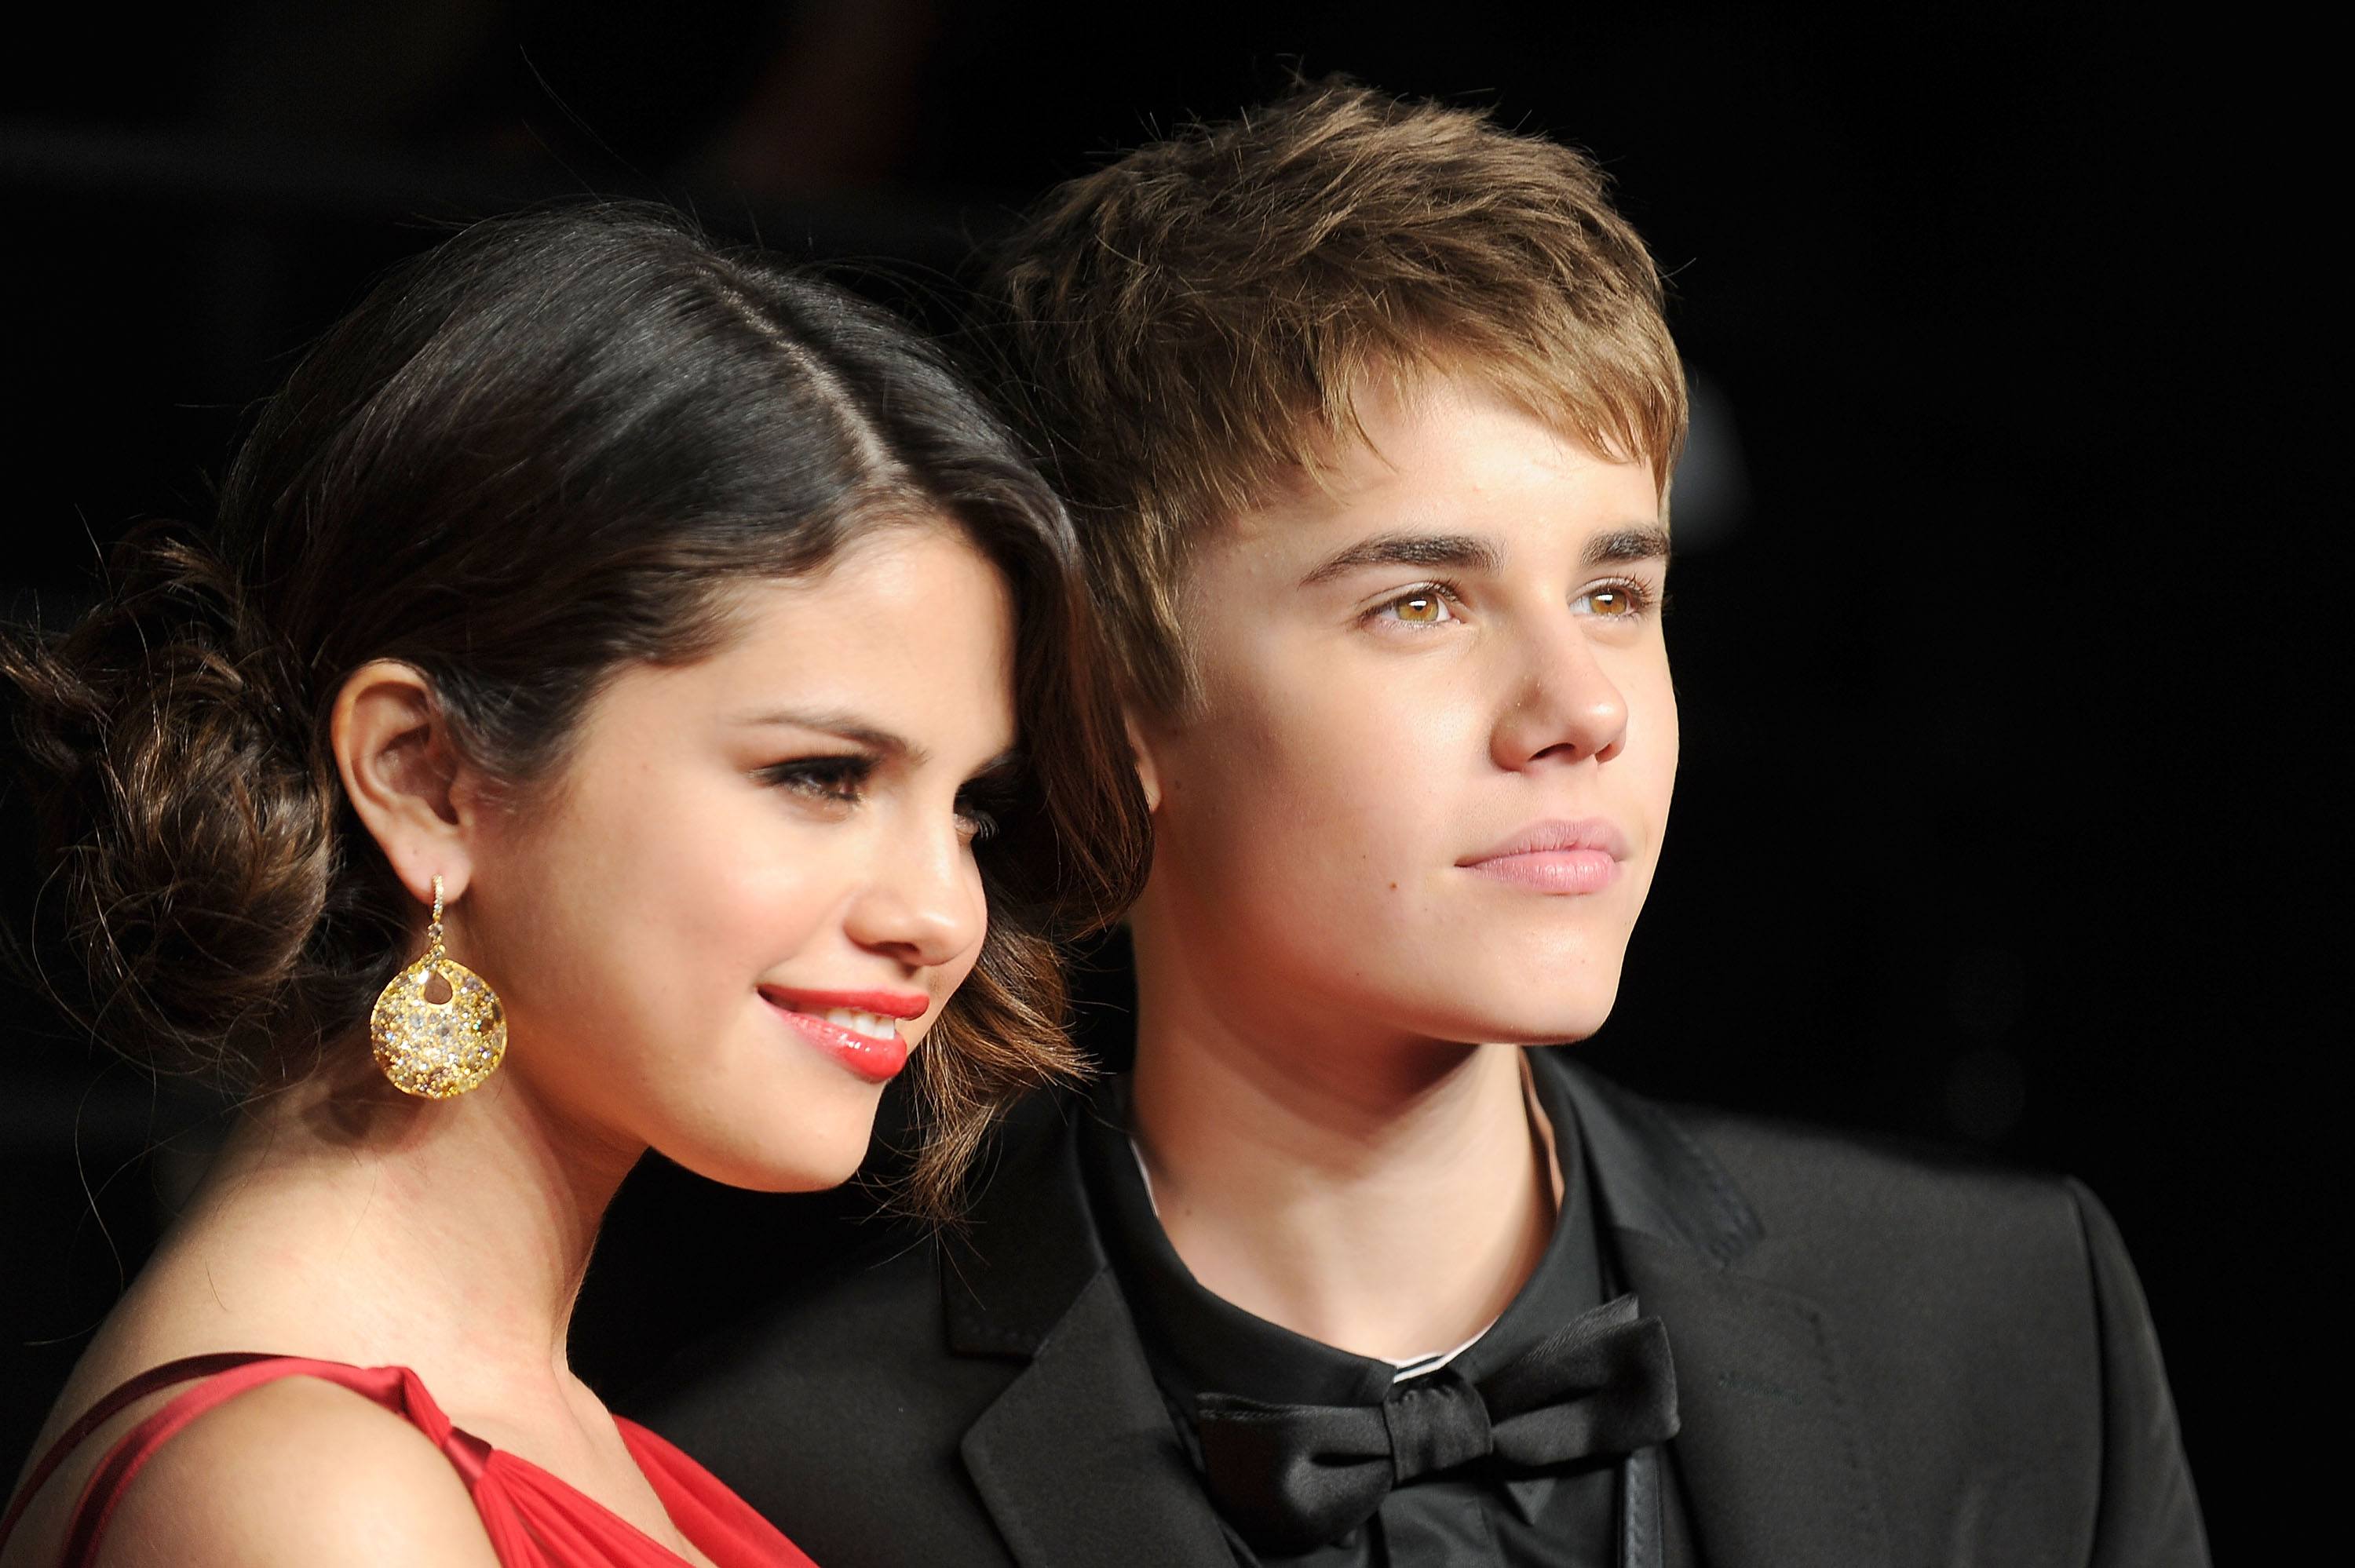 Is Justin Bieber Still Close With His Ex Girlfriend Selena